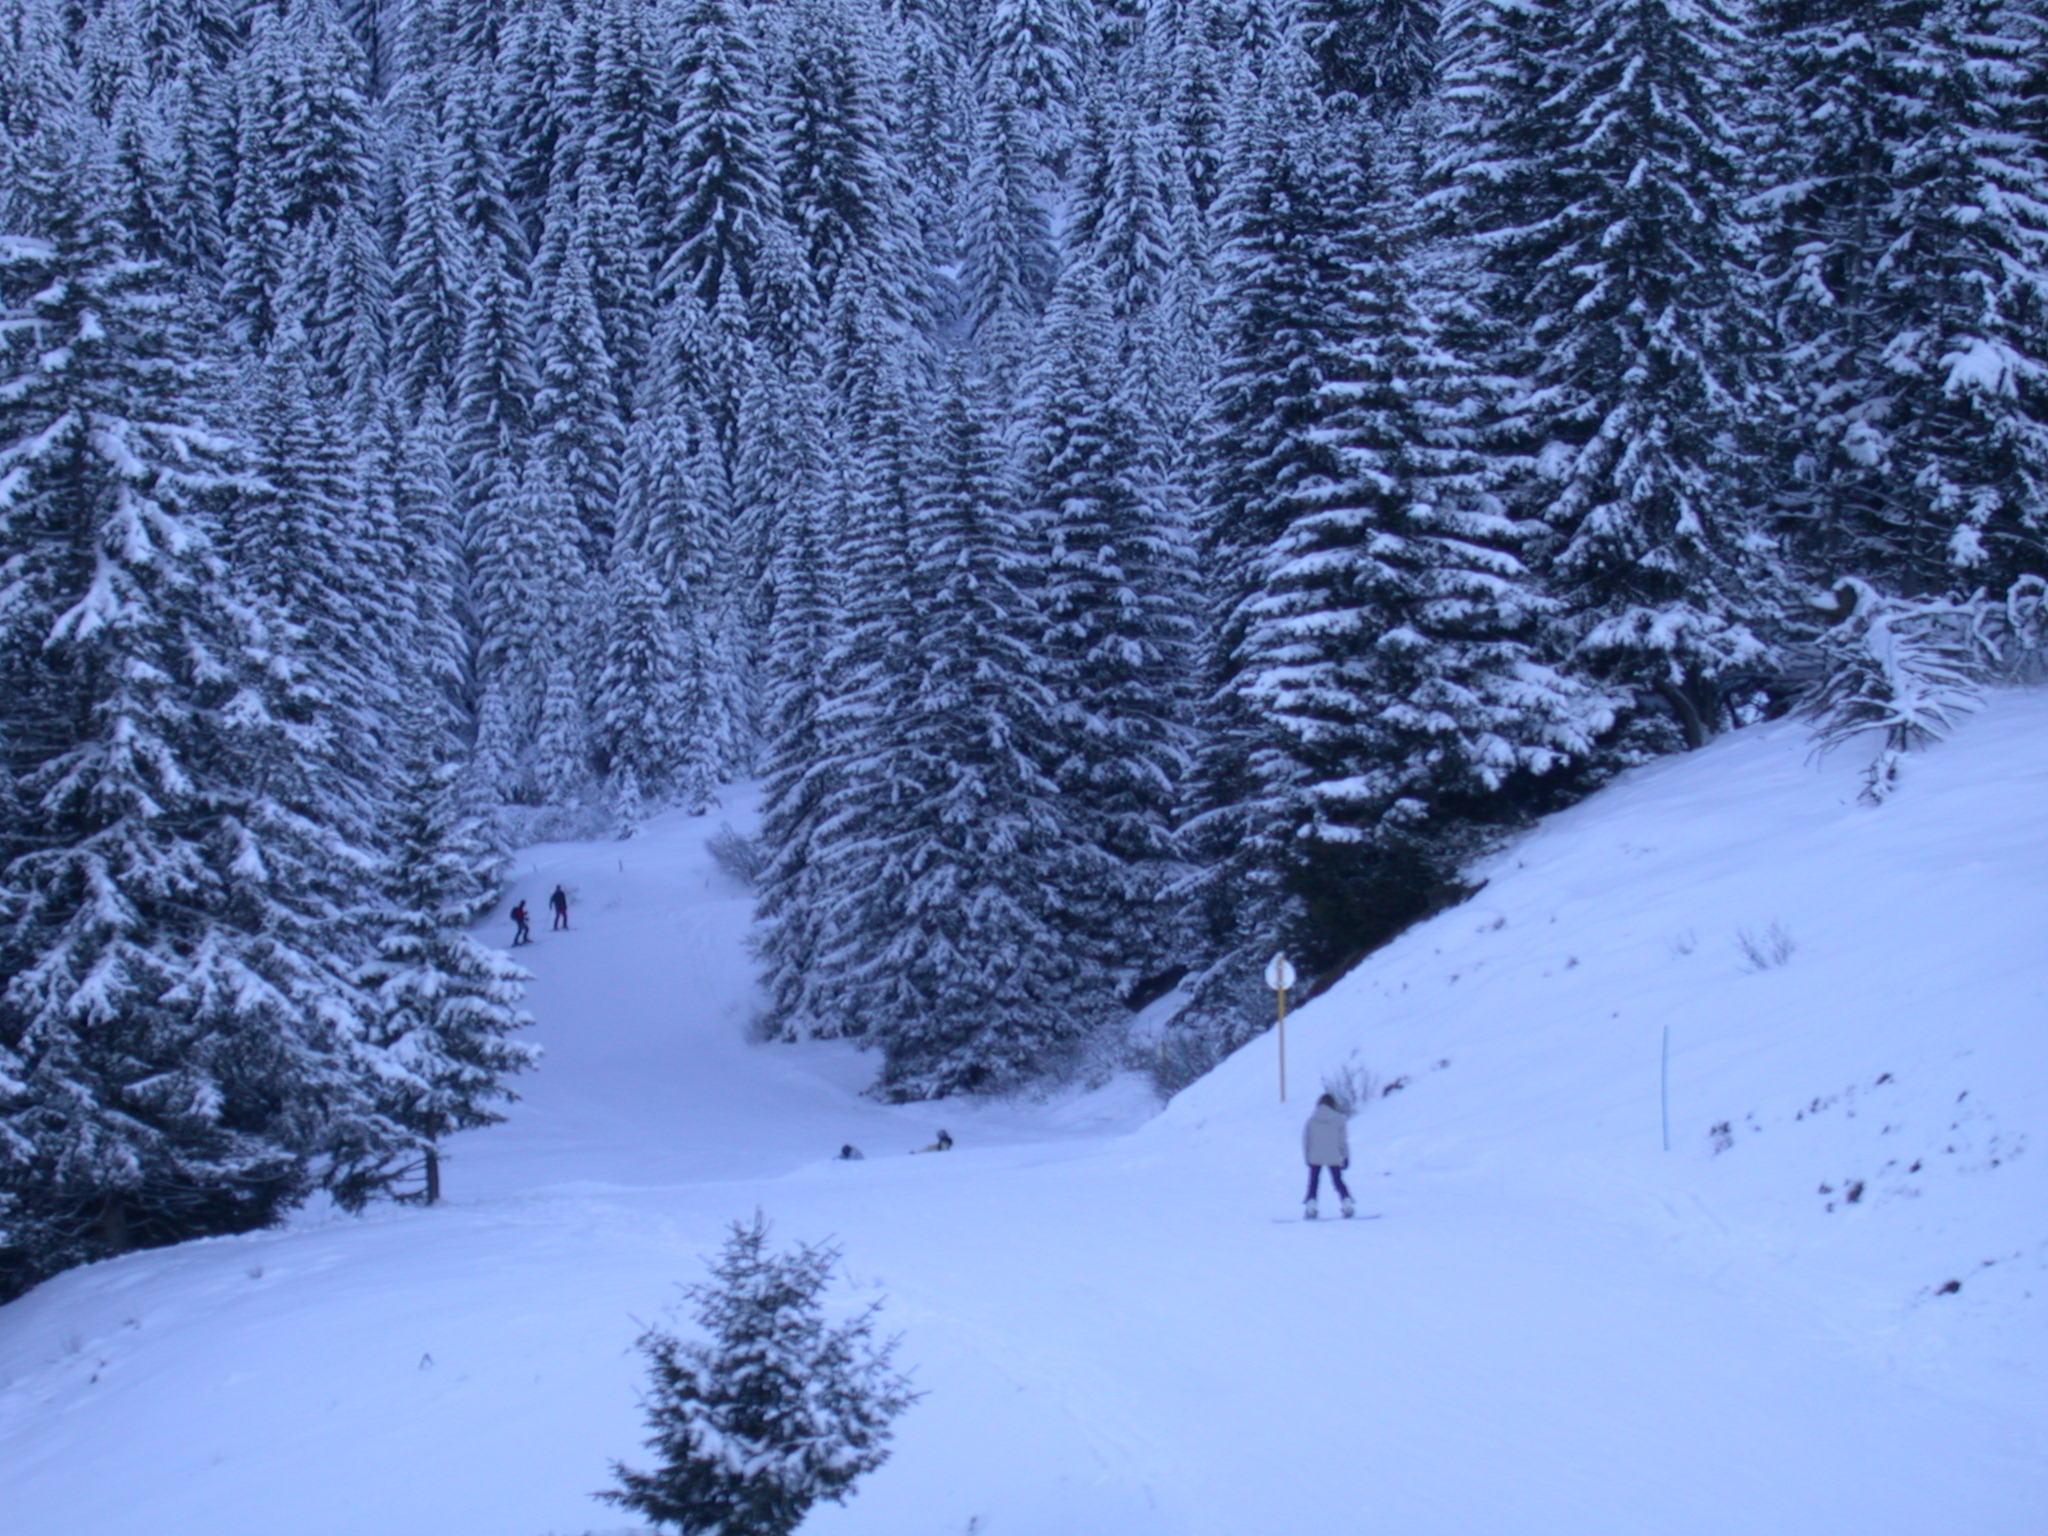 sports wintersports slope skislope slopes winter snow skiing ski trees ferntree pinetrees nature landscapes